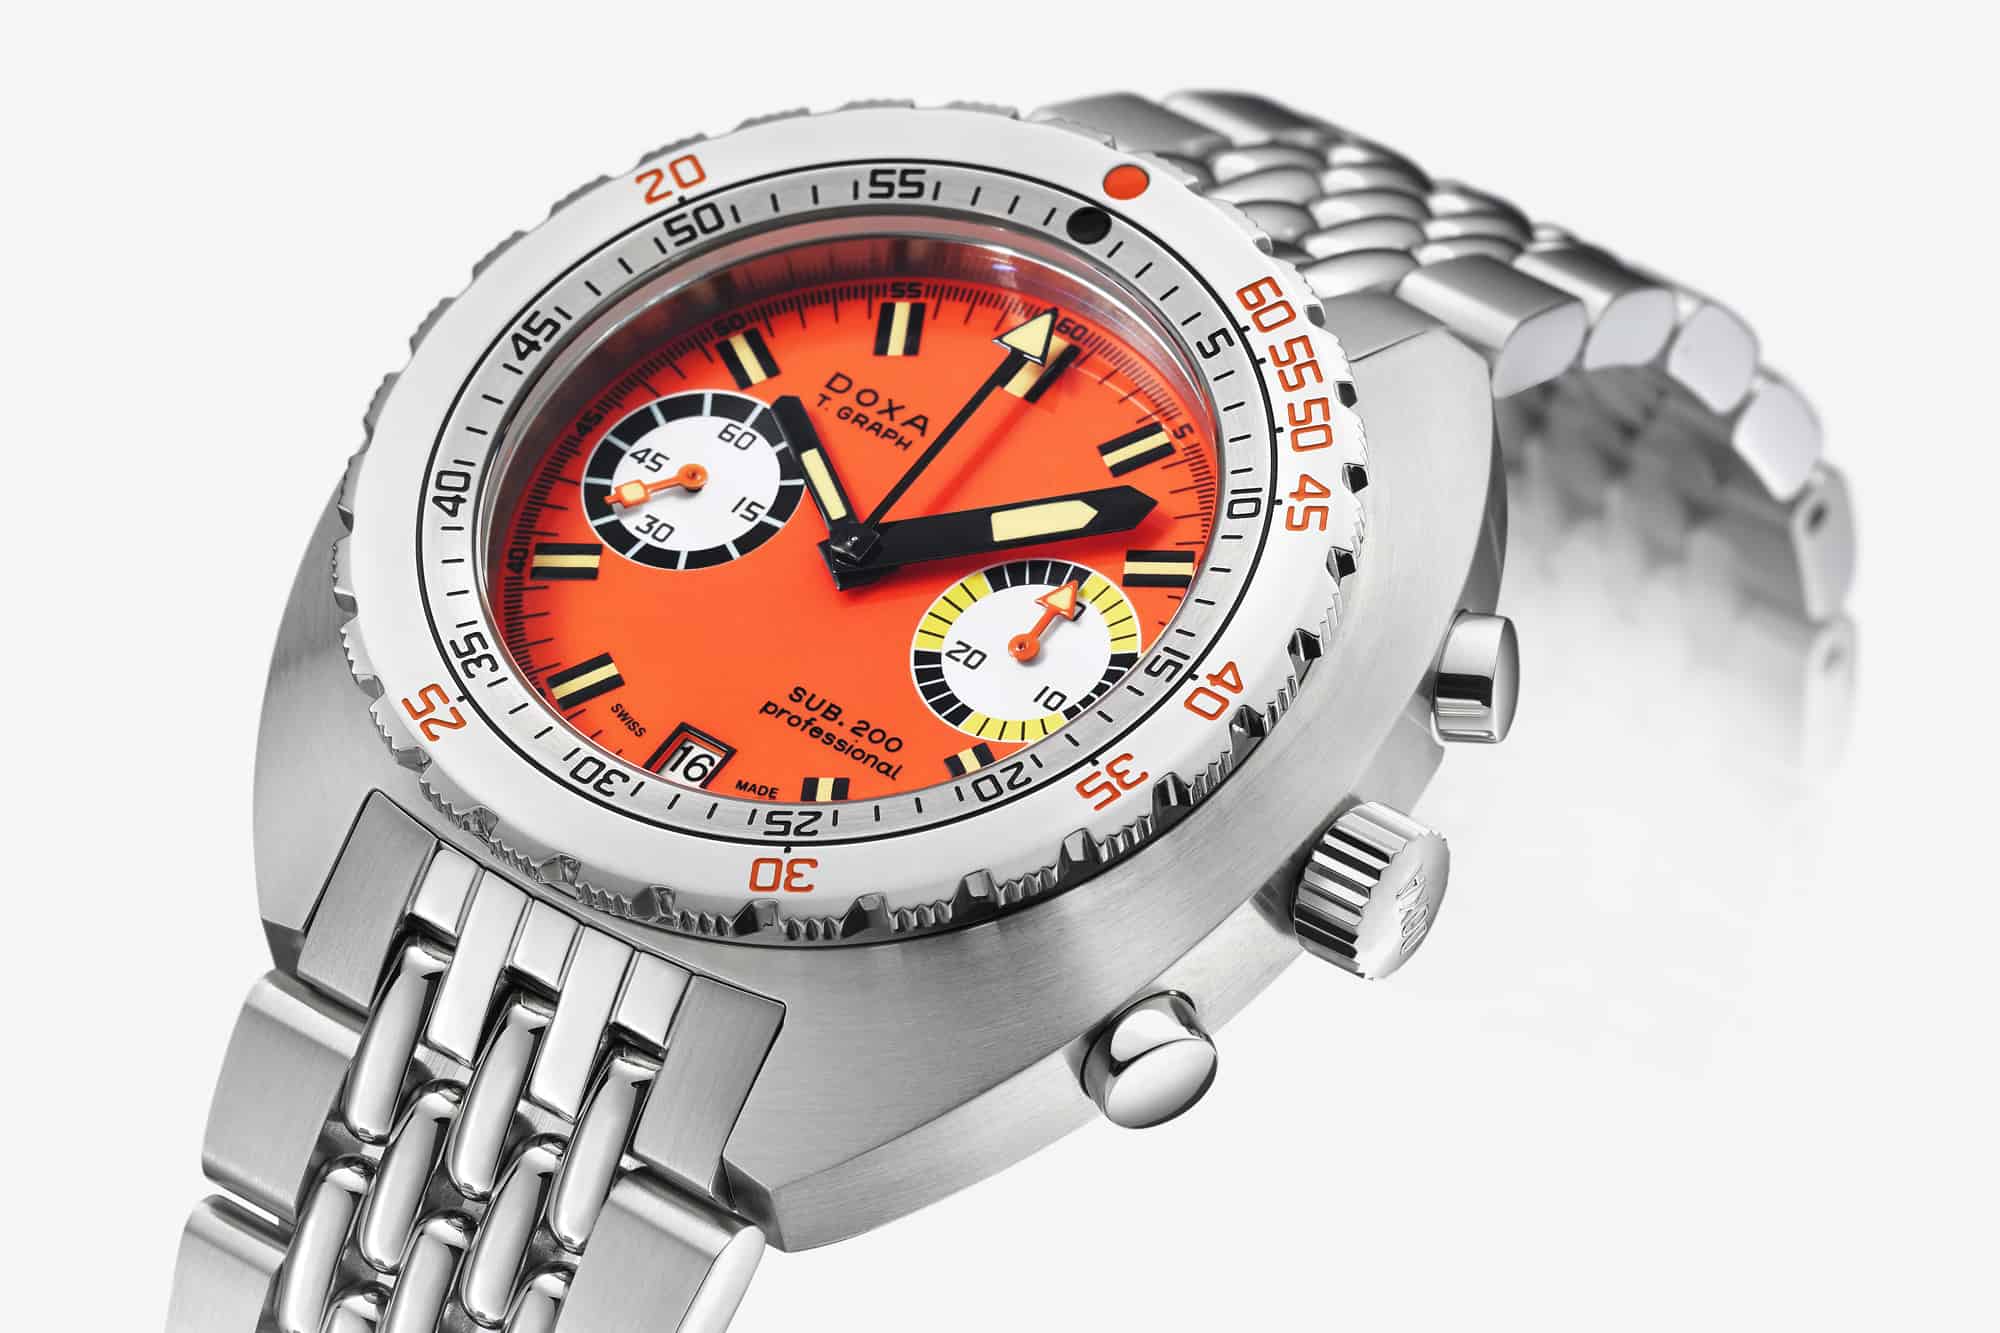 Introducing the Doxa SUB 200 T.Graph